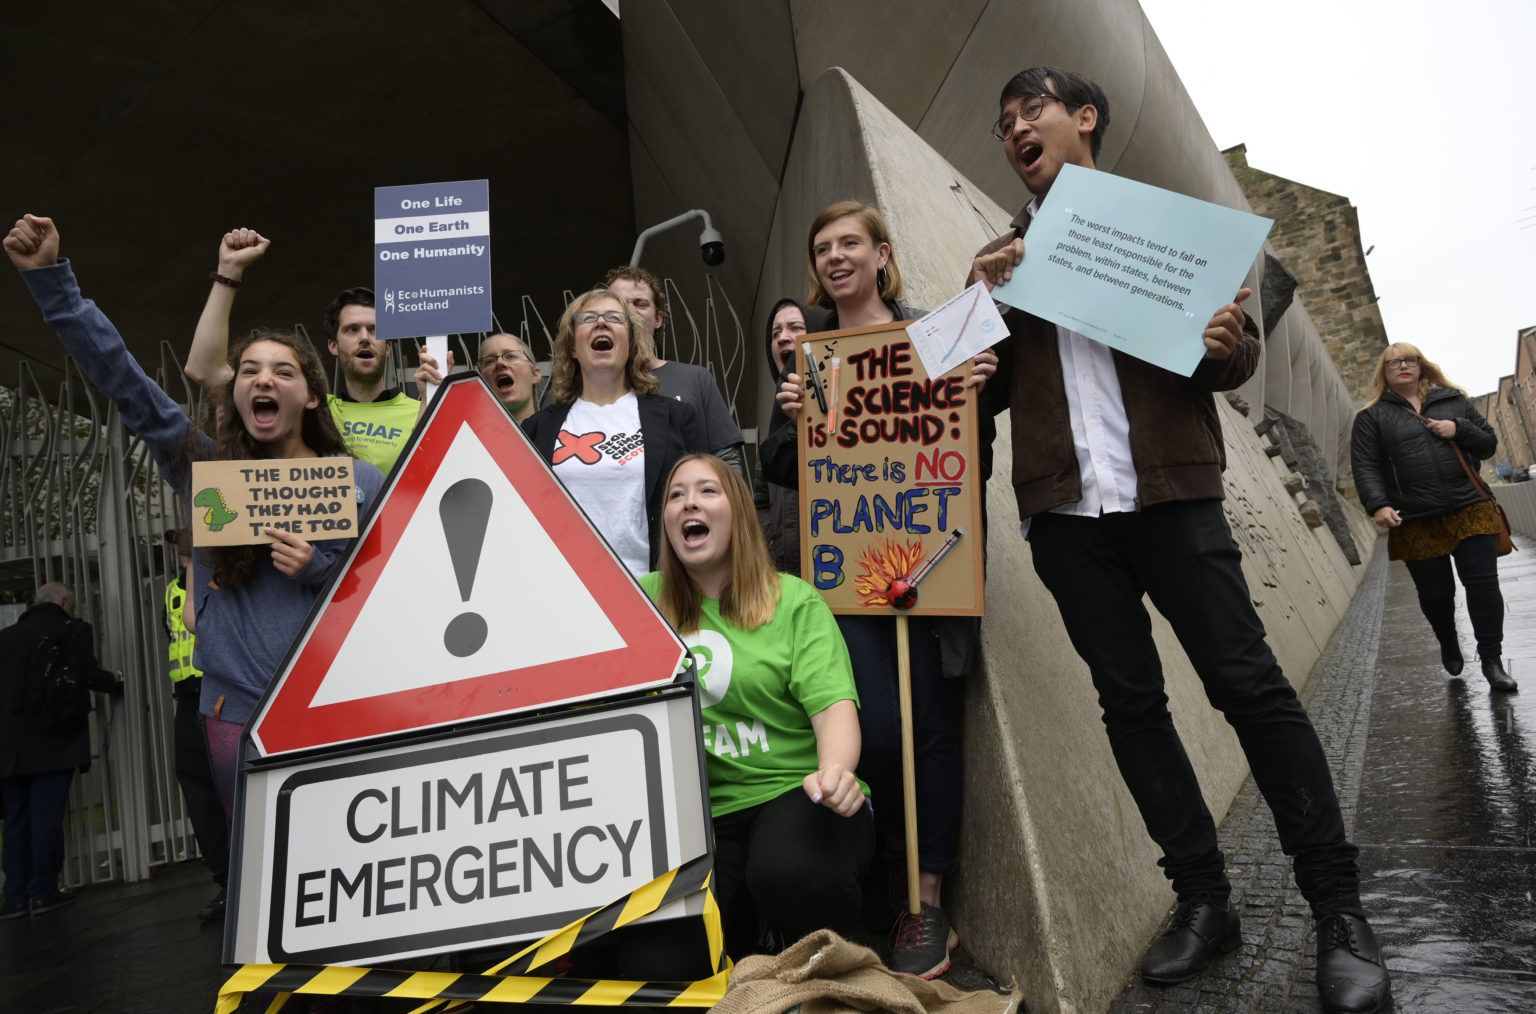 People Power delivers increased action in the Climate Bill